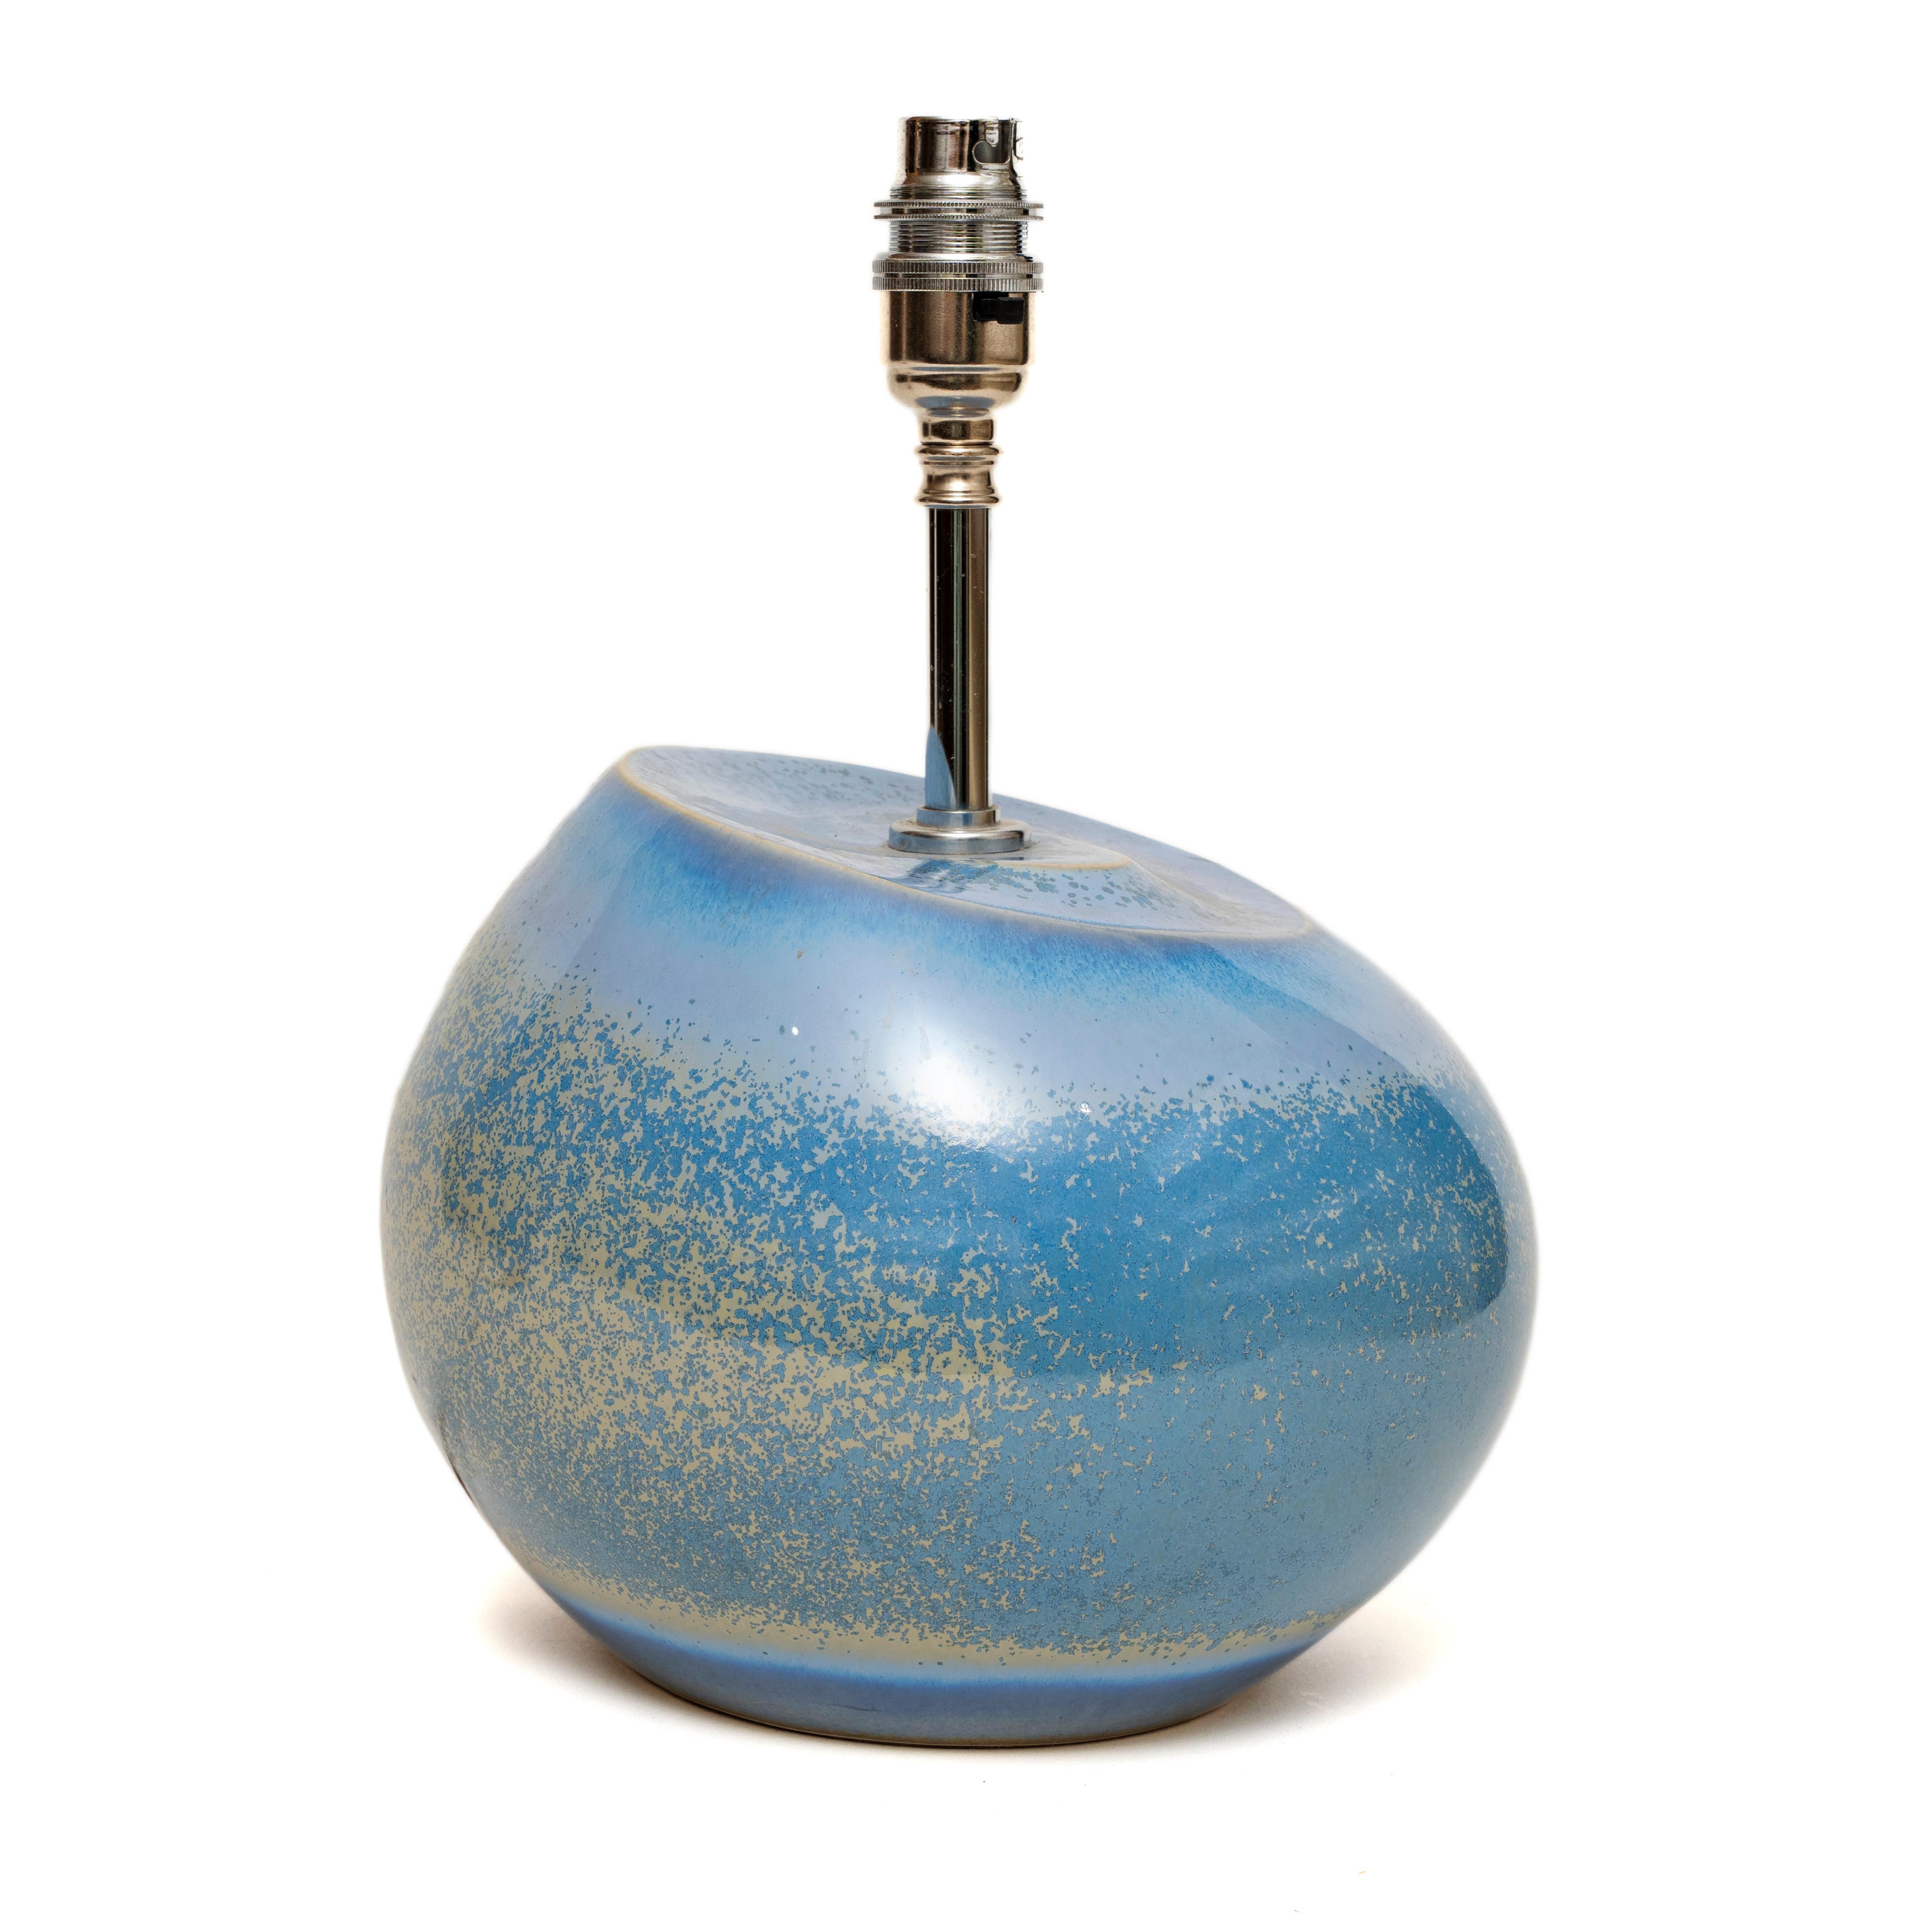 Cobridge stoneware: Modernist blue table lamp, 29cm., 11½” high
Modernist table lamp, the graduating curved levels of the top creates unusual form and softness in the bulbous body
Of interest to Cobridge collectors
Cobridge stoneware modernist